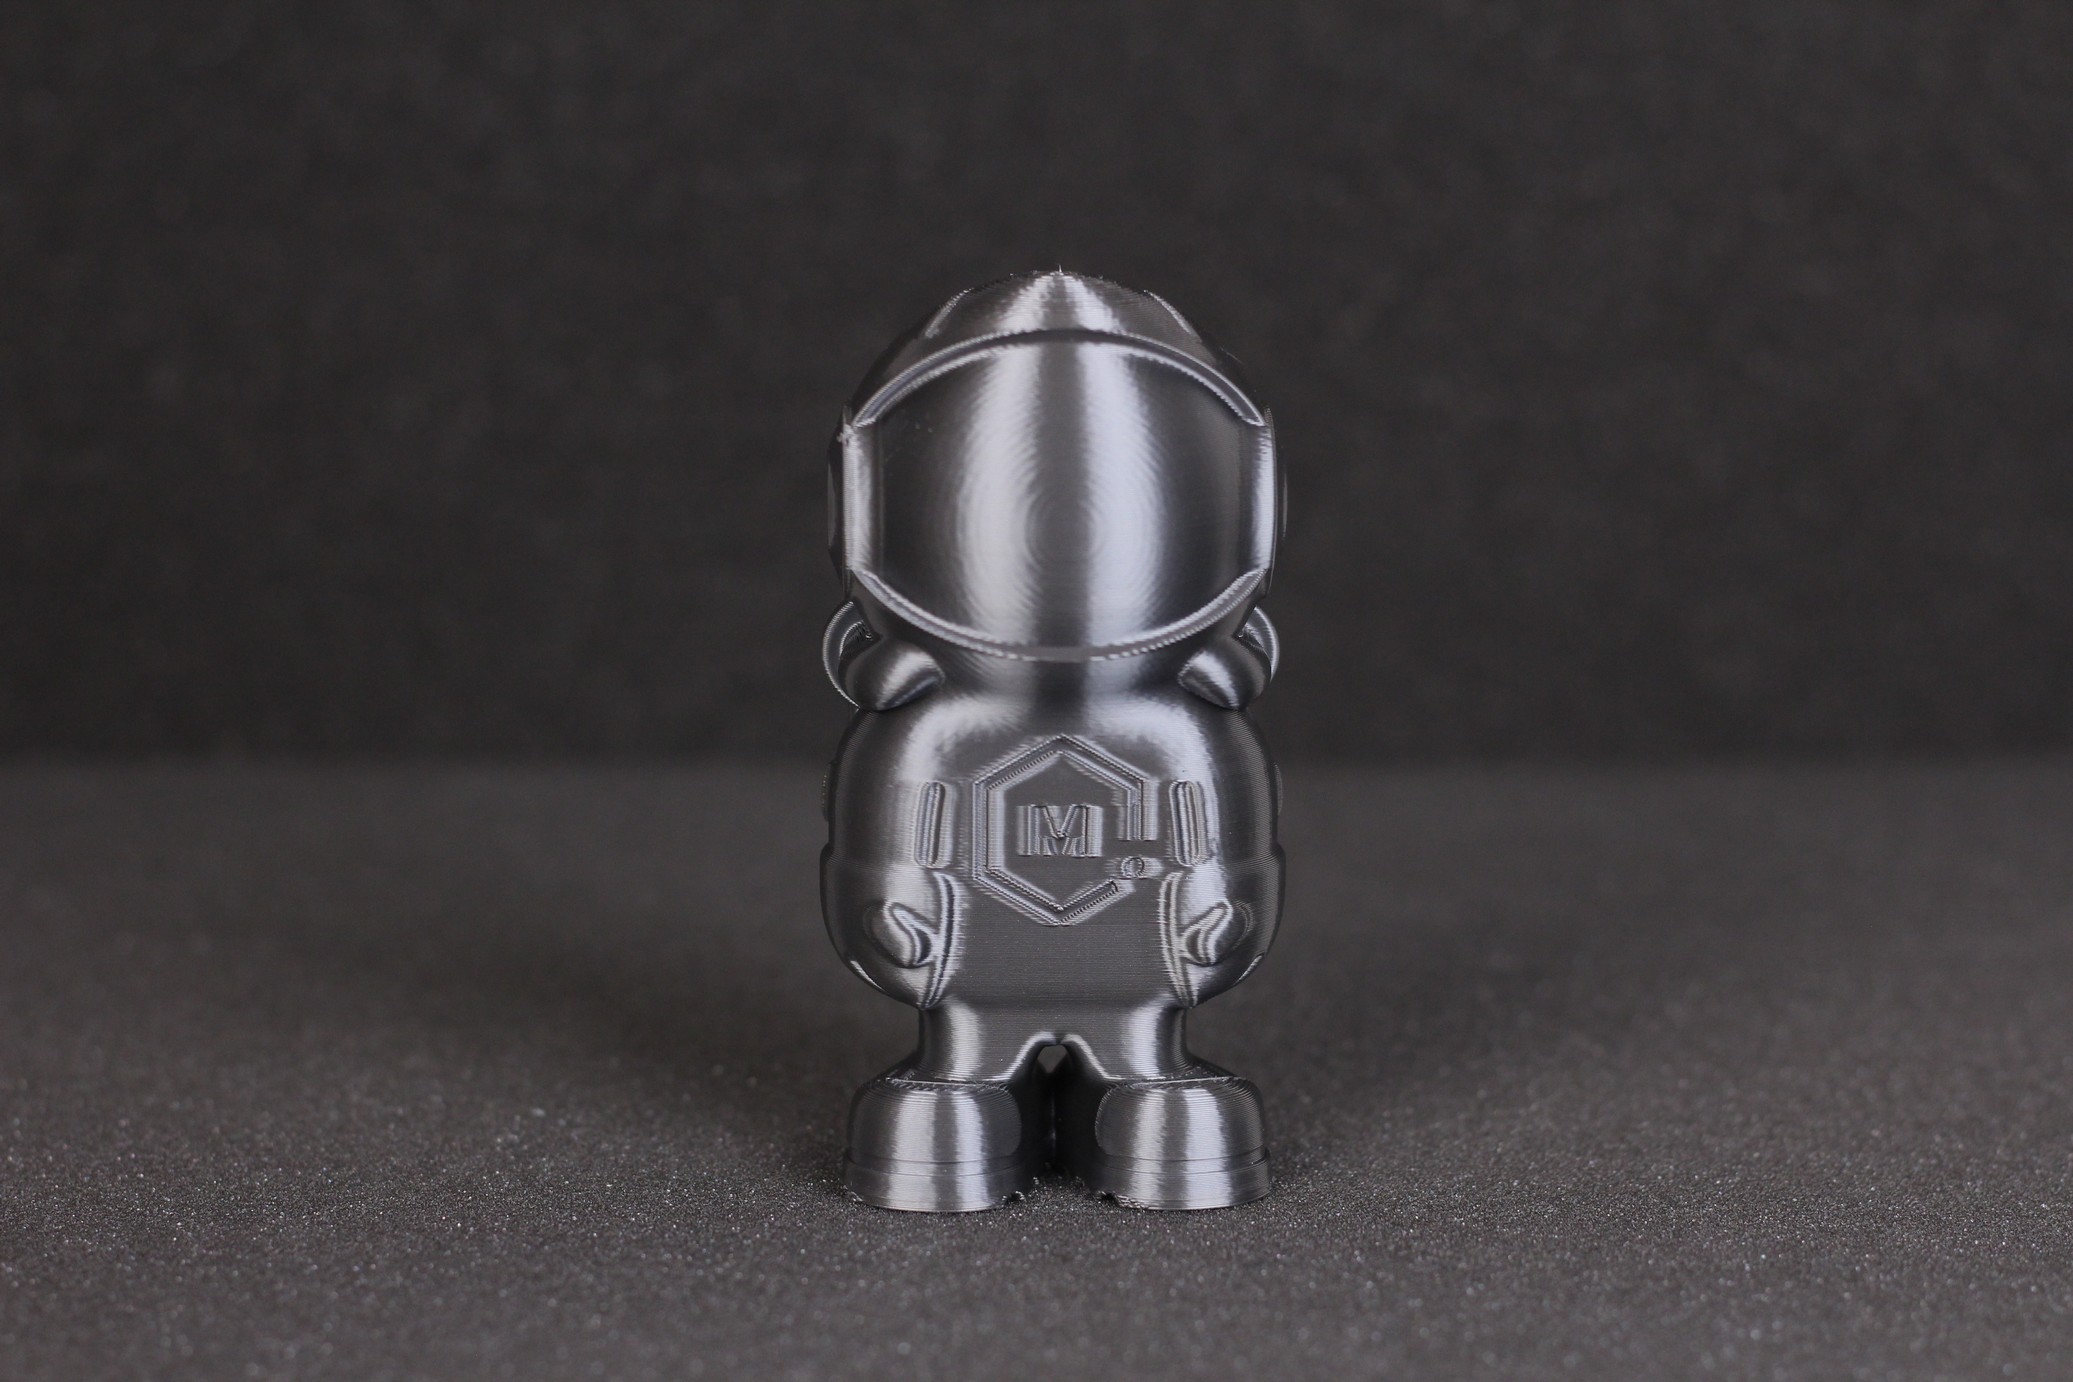 Ender 3 S1 PLA Print Phil A Ment 2 | Creality Ender 3 S1 Review: Almost Perfect